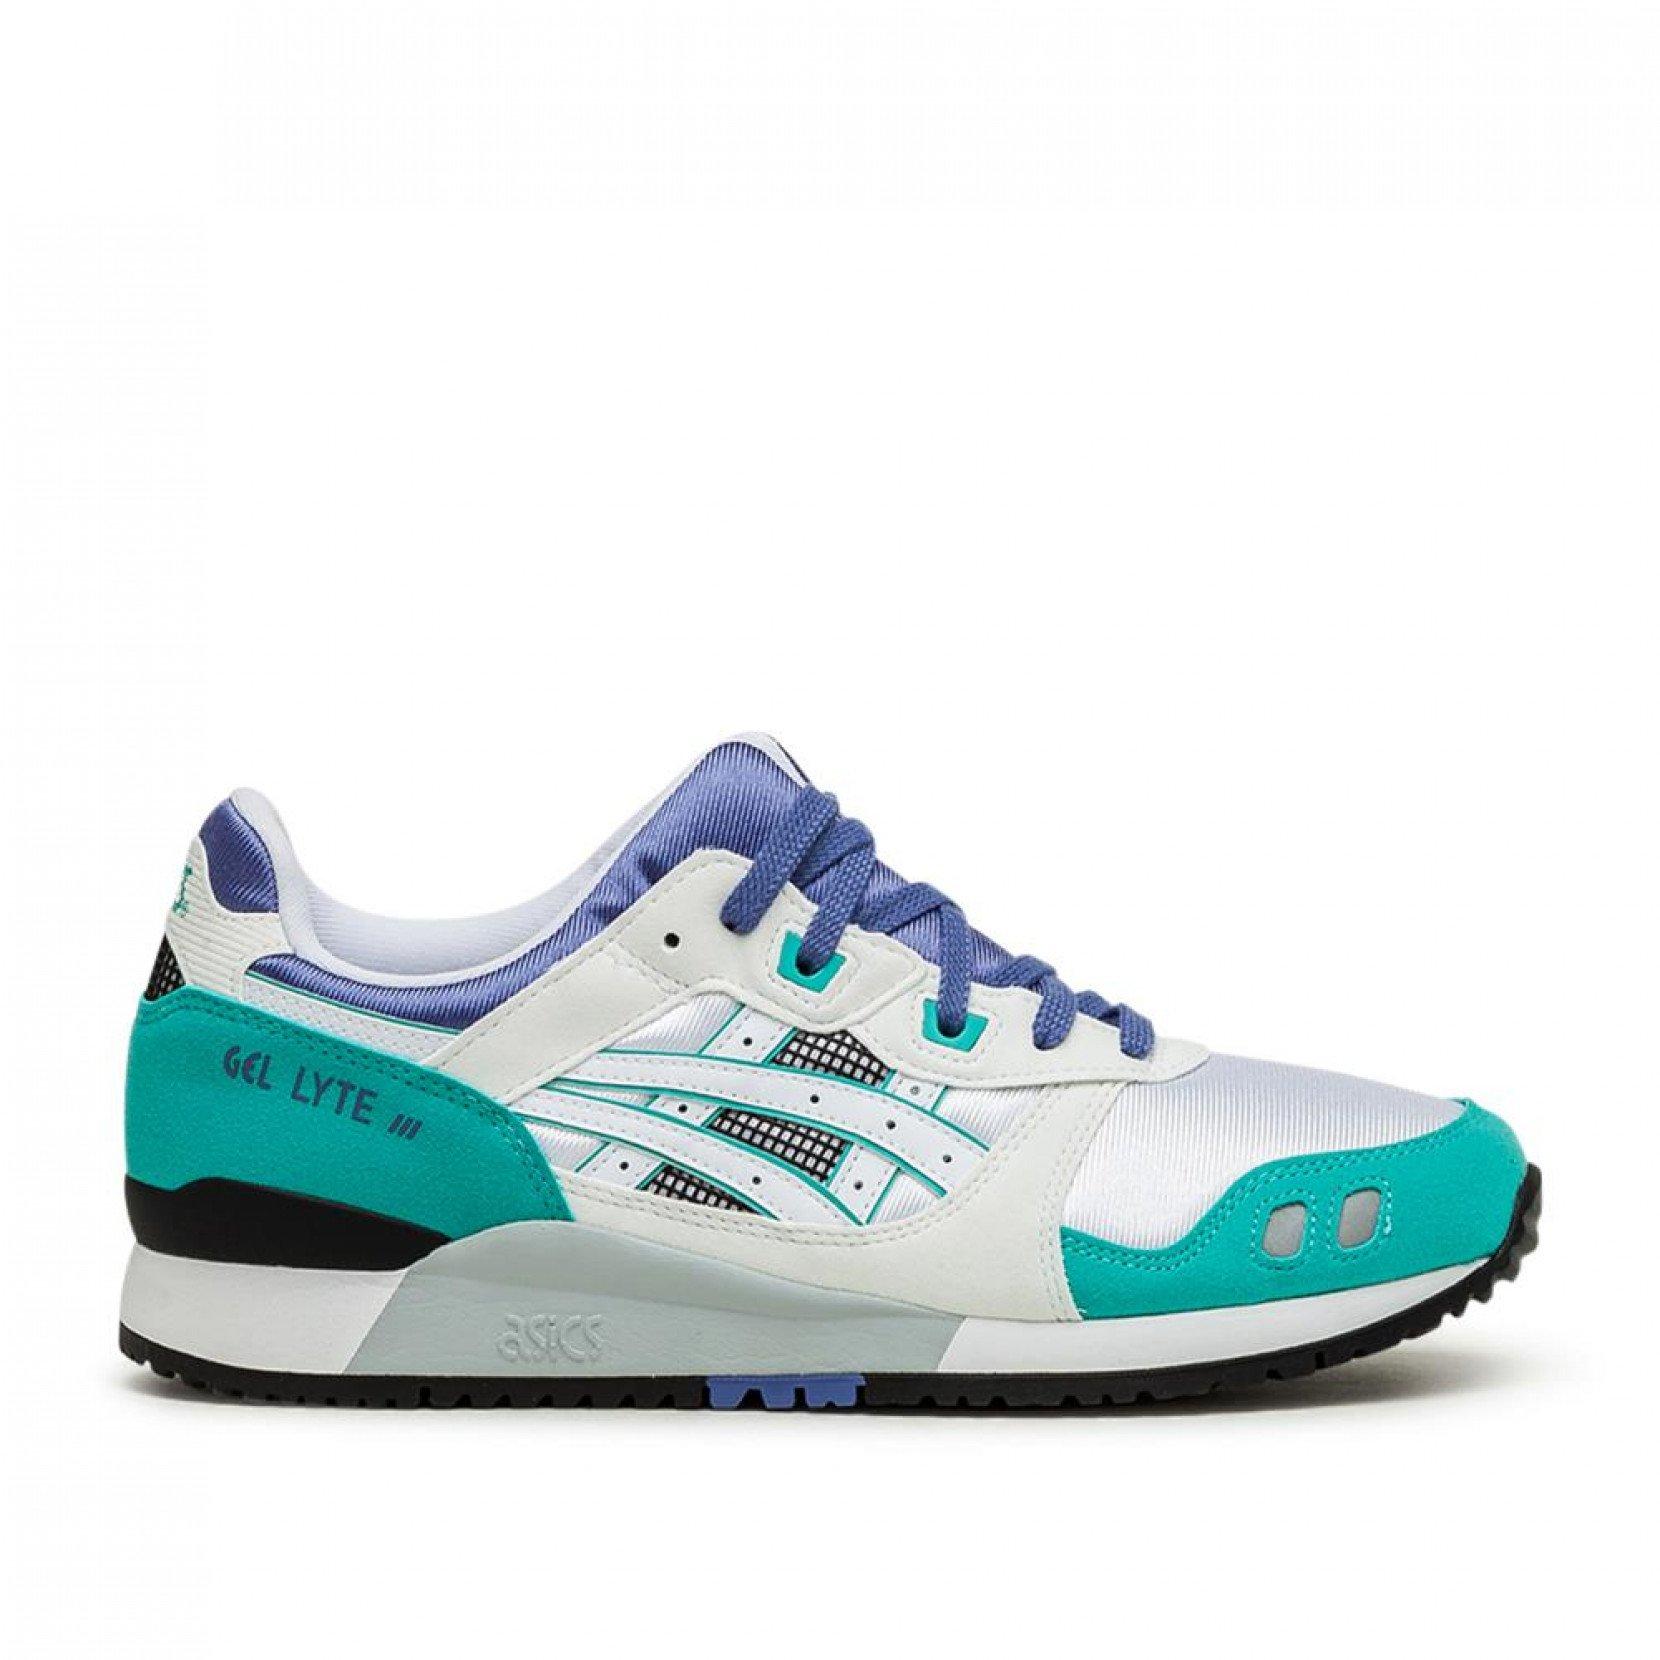 Asics Suede Gel-lyte Iii Og Heritage Trainers in White (Blue) for Men -  Save 63% - Lyst